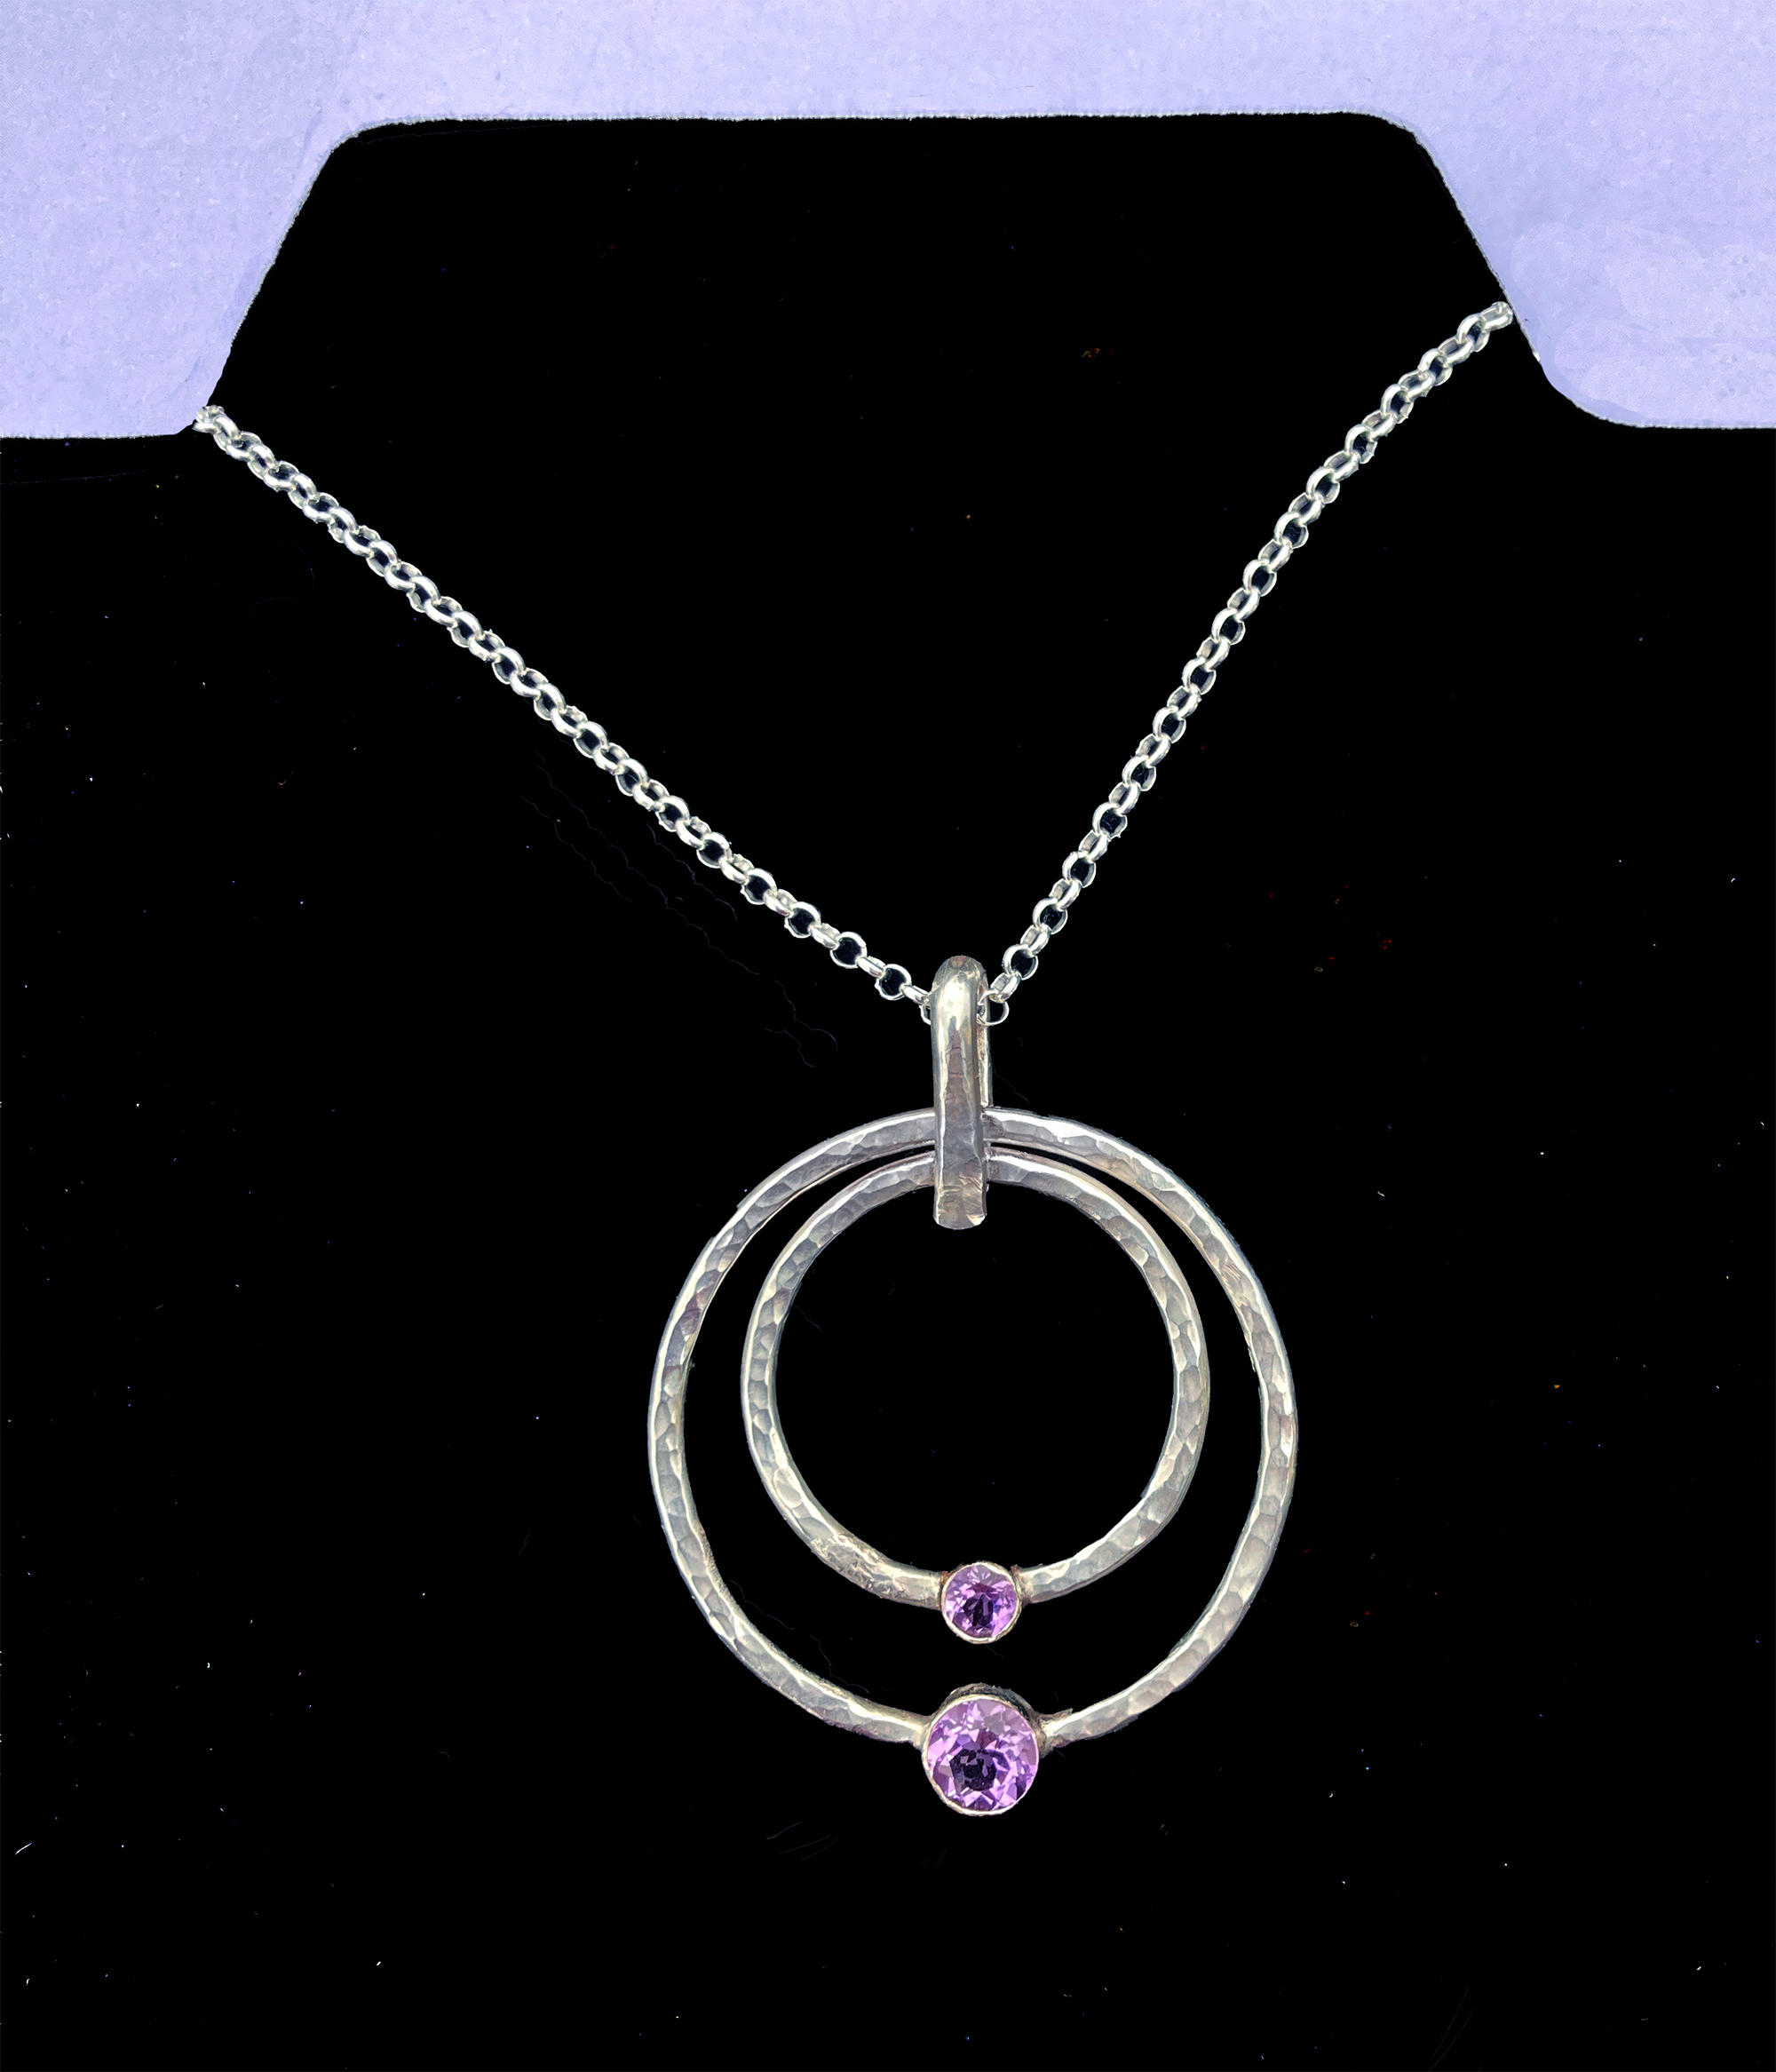 Hammered Sterling Silver and Amethyst Circle Necklace